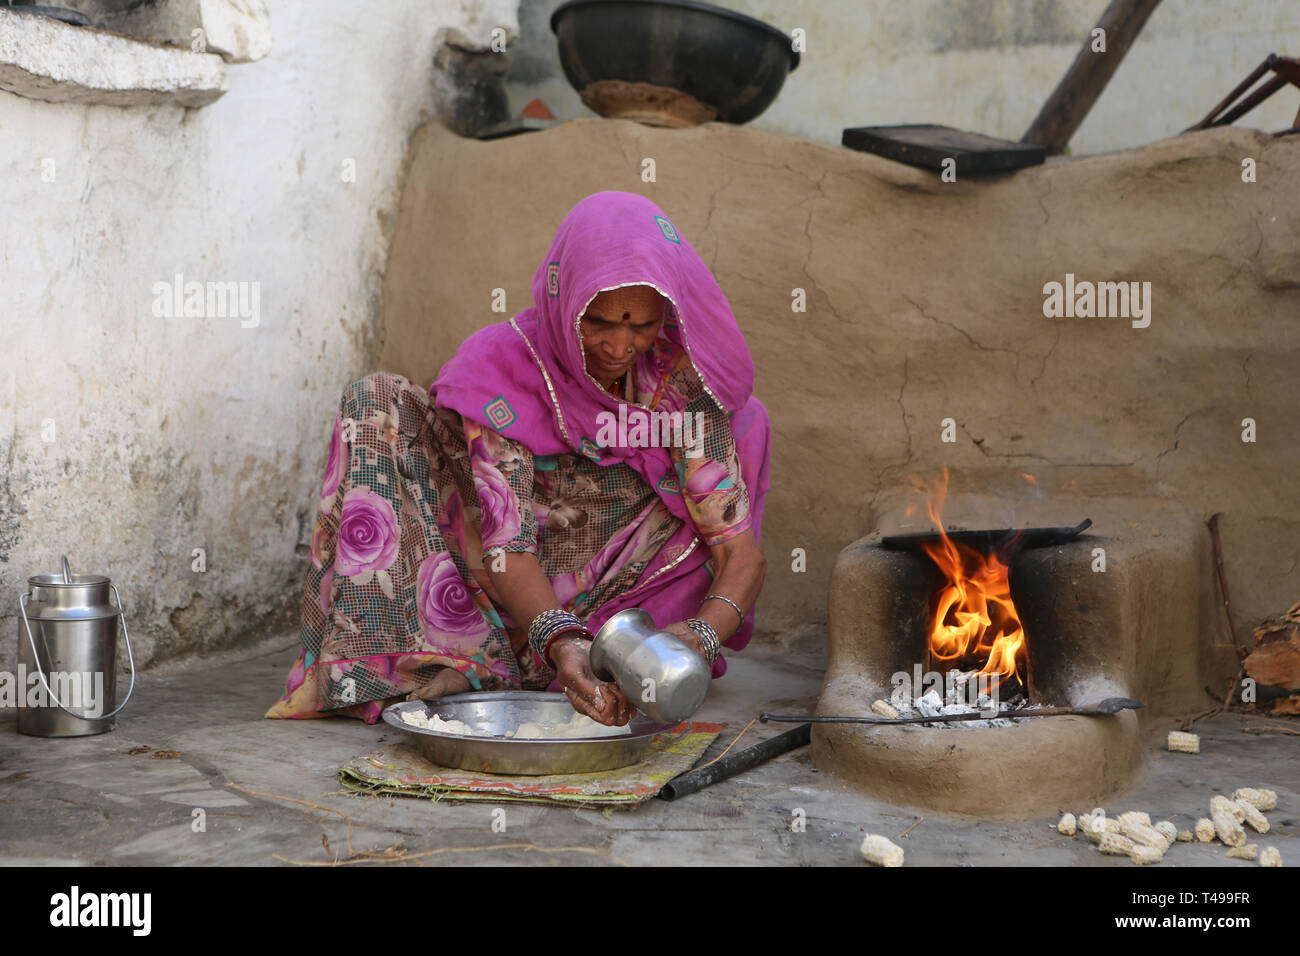 Rajasthani woman cooking indien chapati --- chapatti, pain indien Jodhpur, Rajasthan, Inde, Asie Banque D'Images